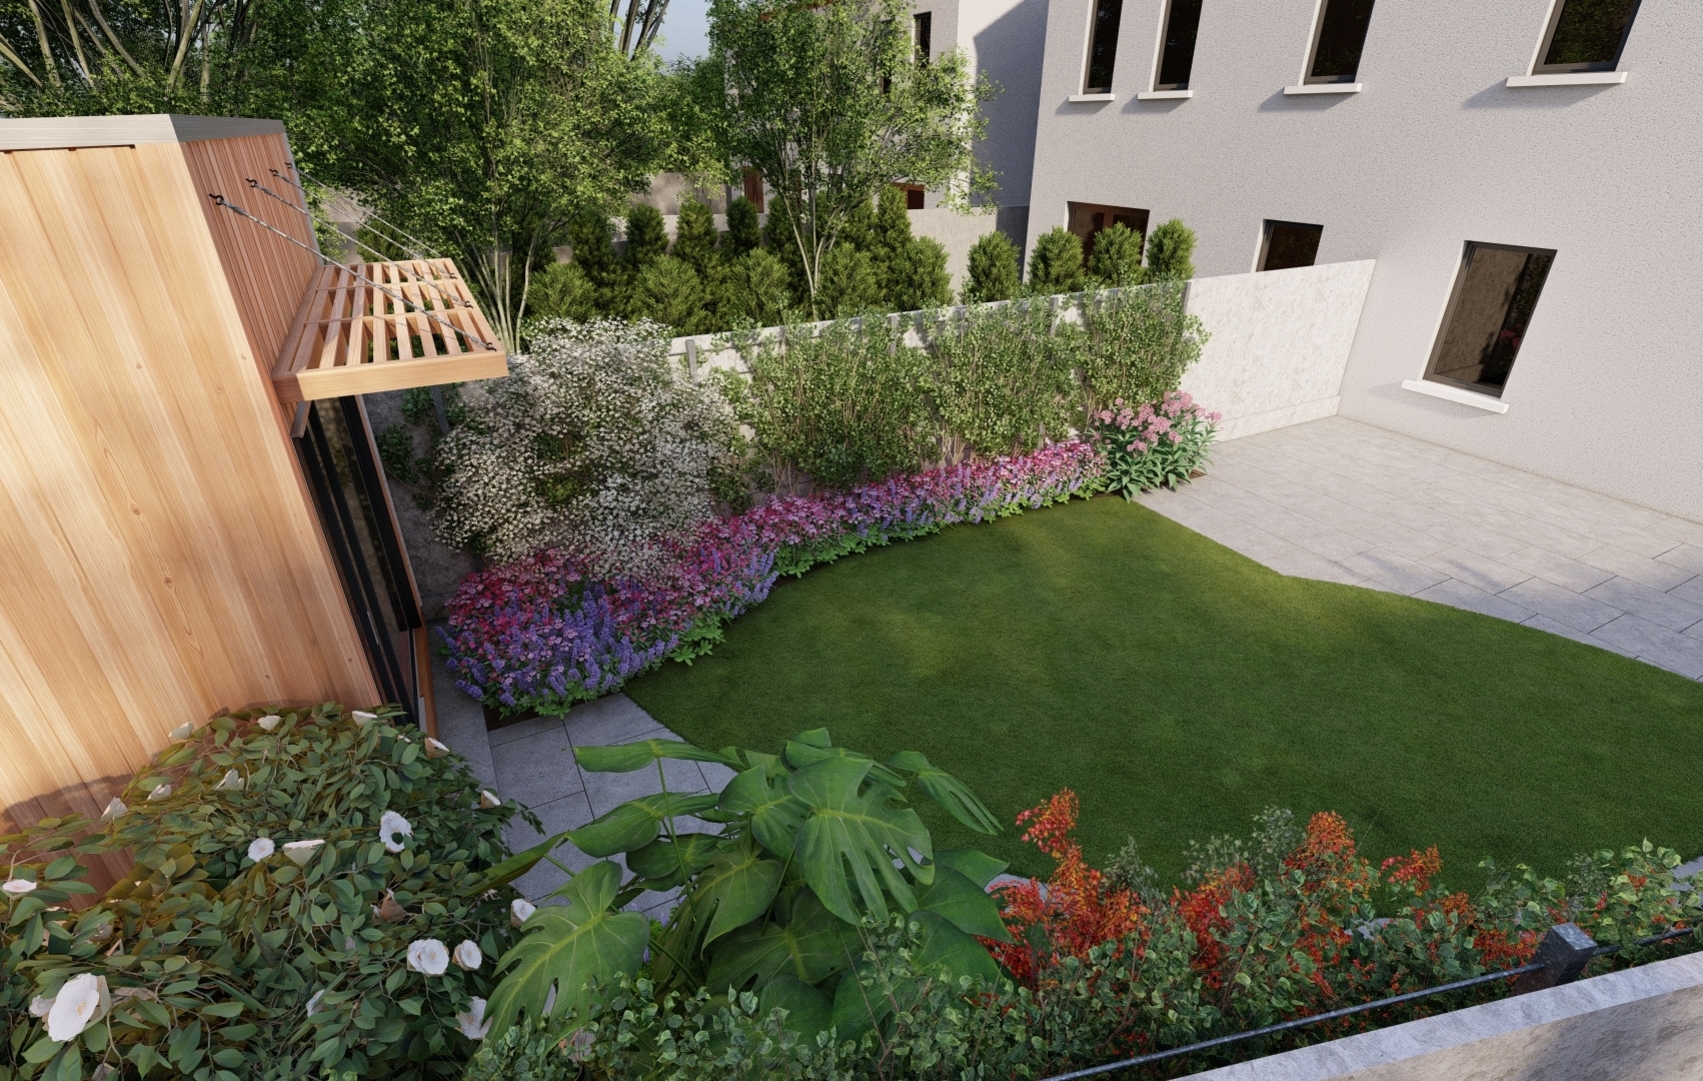 Design Visual showing Patio area, Home Office, climbing plants, lawn and borders, Limestone paving and mature trees for a small garden in Maynooth | Owen Chubb Garden Design